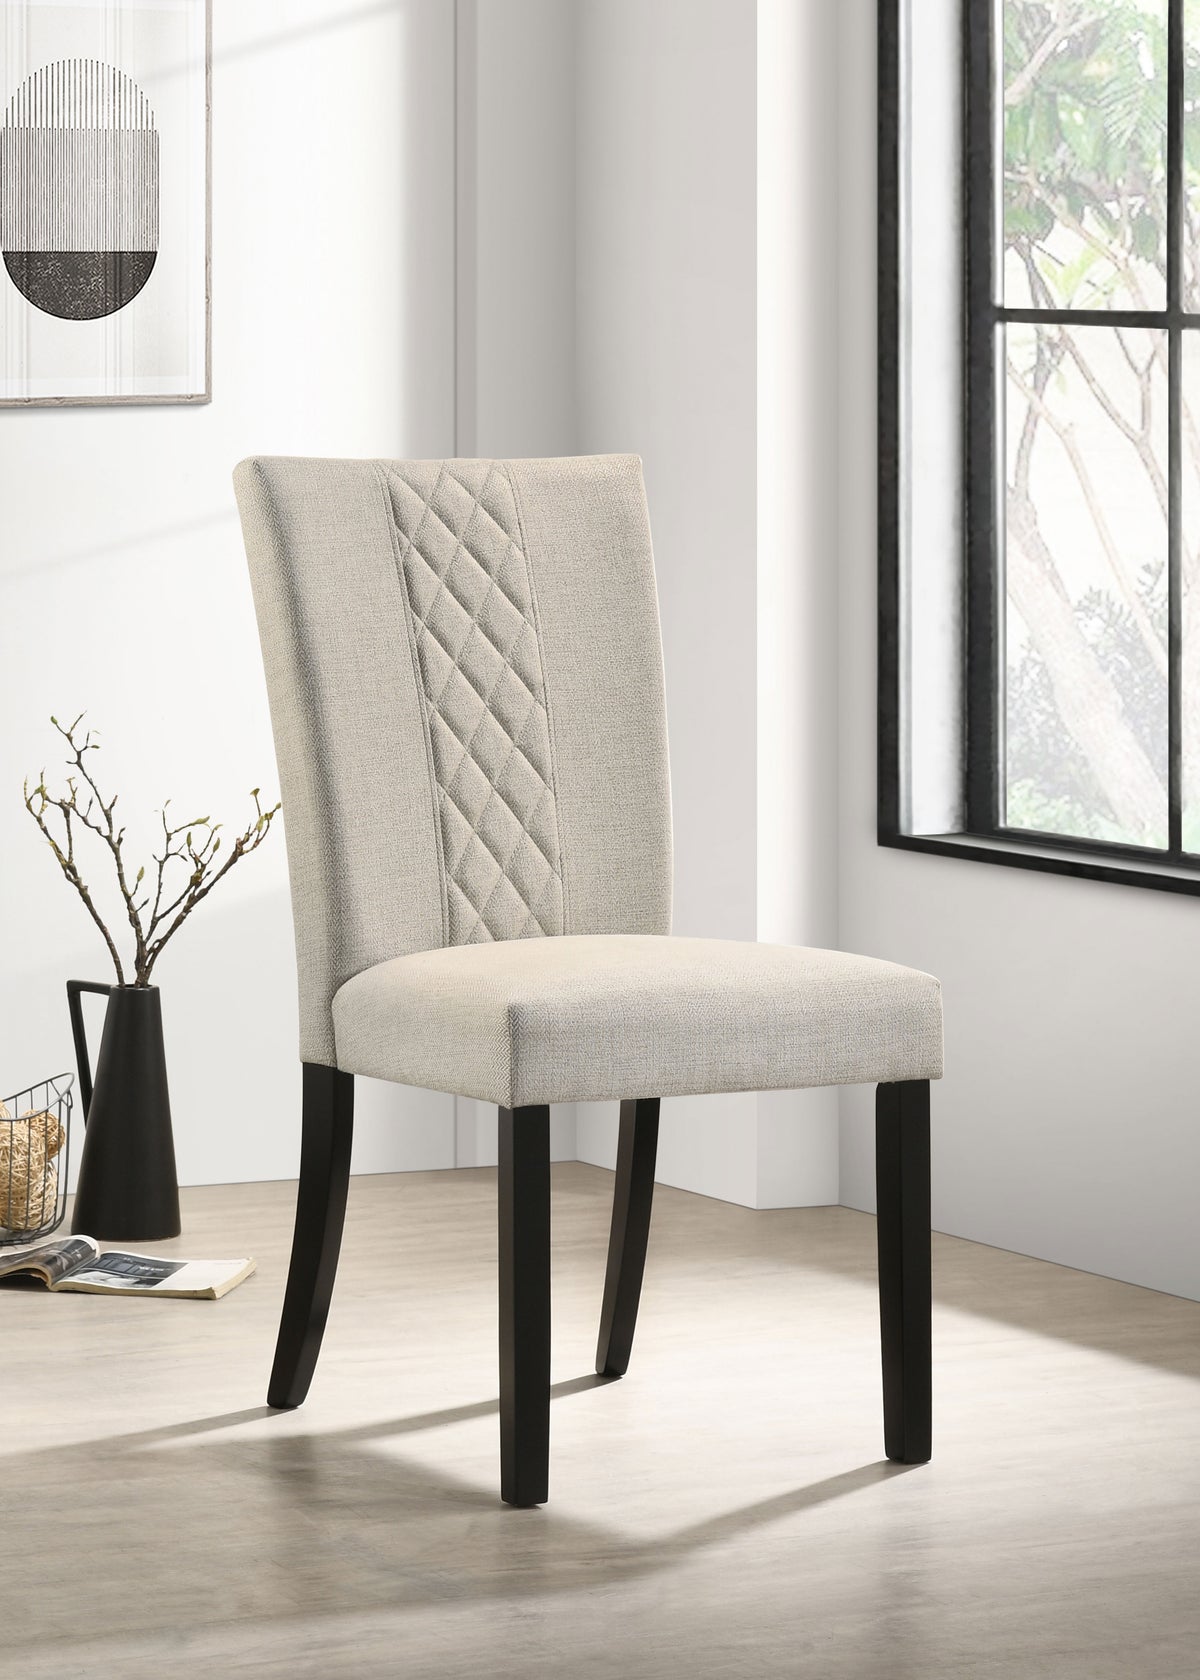 Malia Upholstered Solid Back Dining Side Chair Beige and Black (Set of 2) Malia Upholstered Solid Back Dining Side Chair Beige and Black (Set of 2) Half Price Furniture